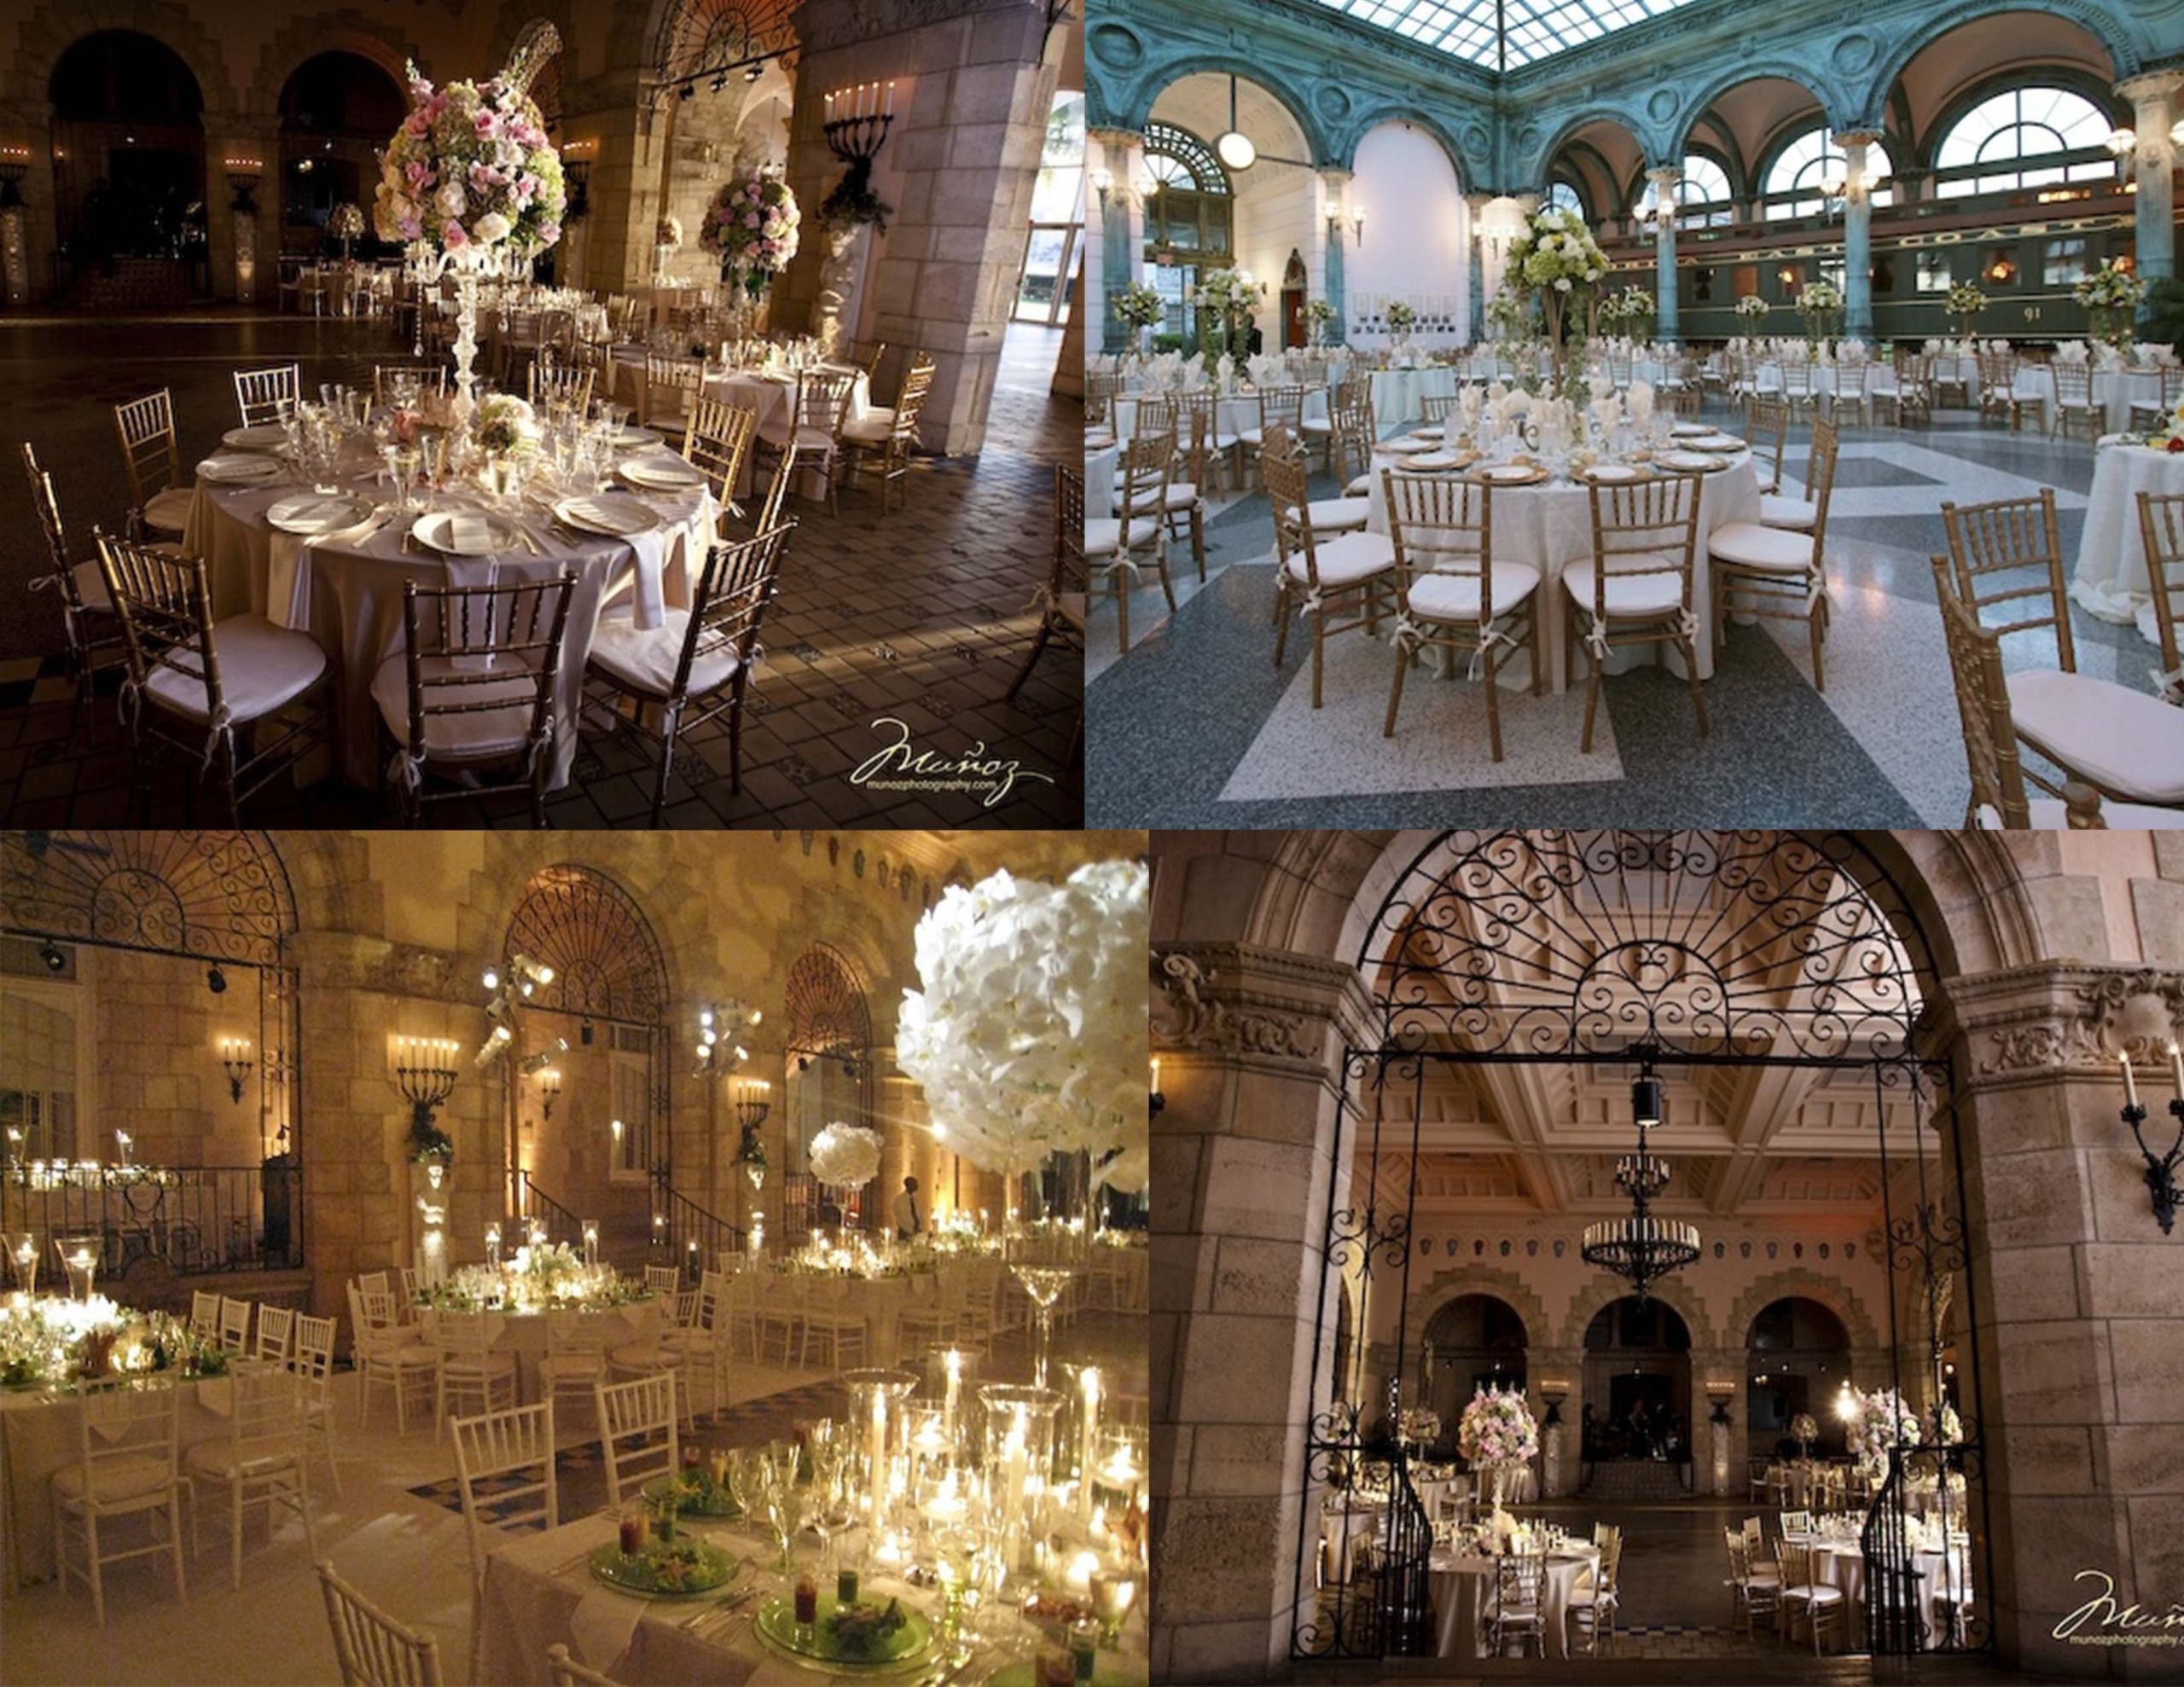 Wedding Venues In South Florida
 The Planning pany s Top South Florida Wedding Venues